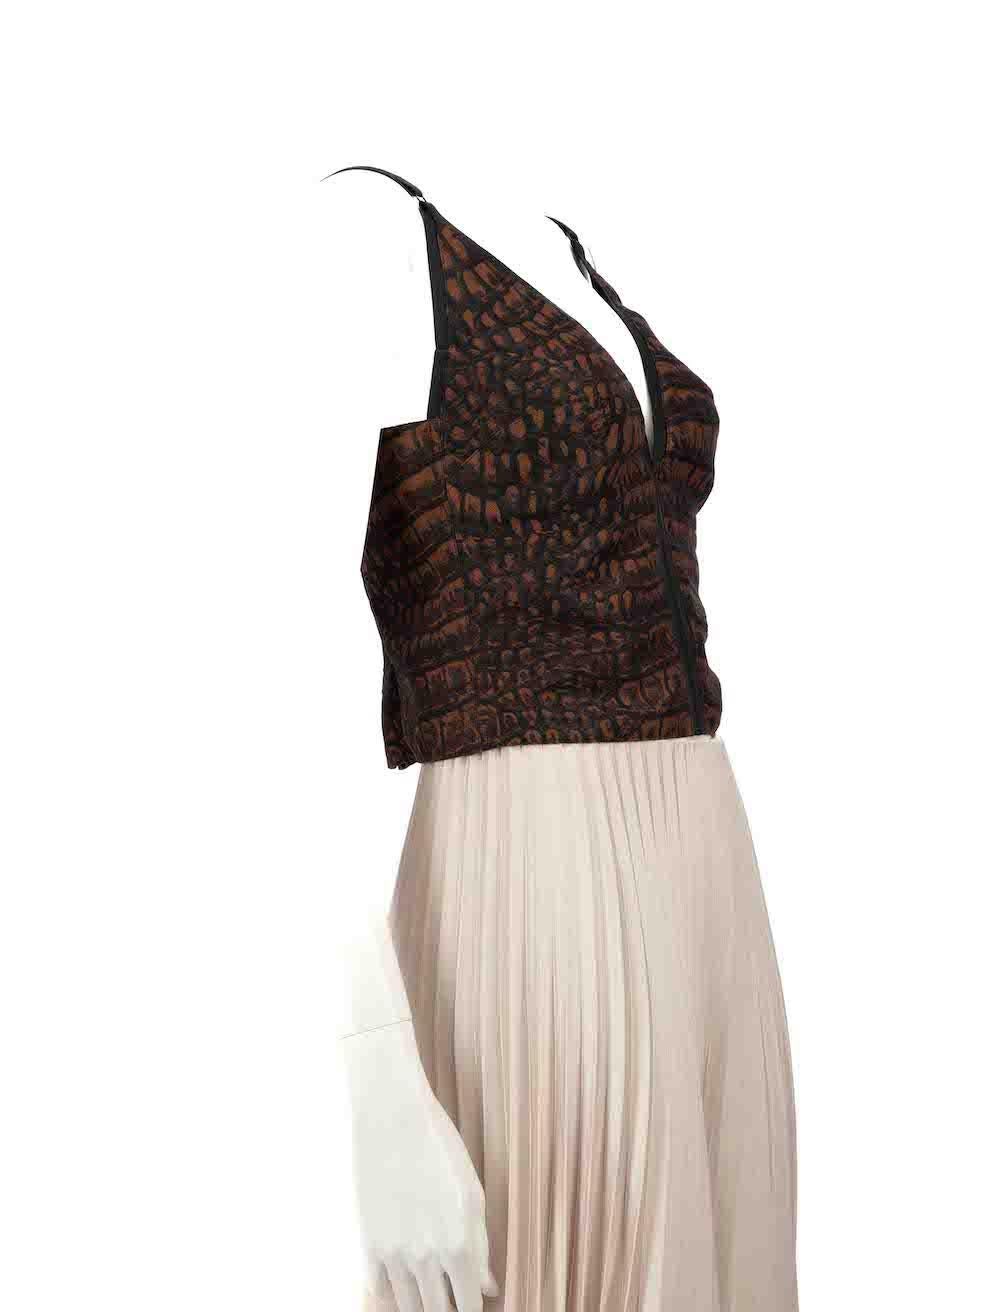 CONDITION is Very good. Hardly any visible wear to top is evident on this used Stella McCartney designer resale item.
 
 
 
 Details
 
 
 Brown
 
 Polyester
 
 Top
 
 Crocodile pattern
 
 Sleeveless
 
 Adjustable shoulder straps
 
 Cropped
 
 Back